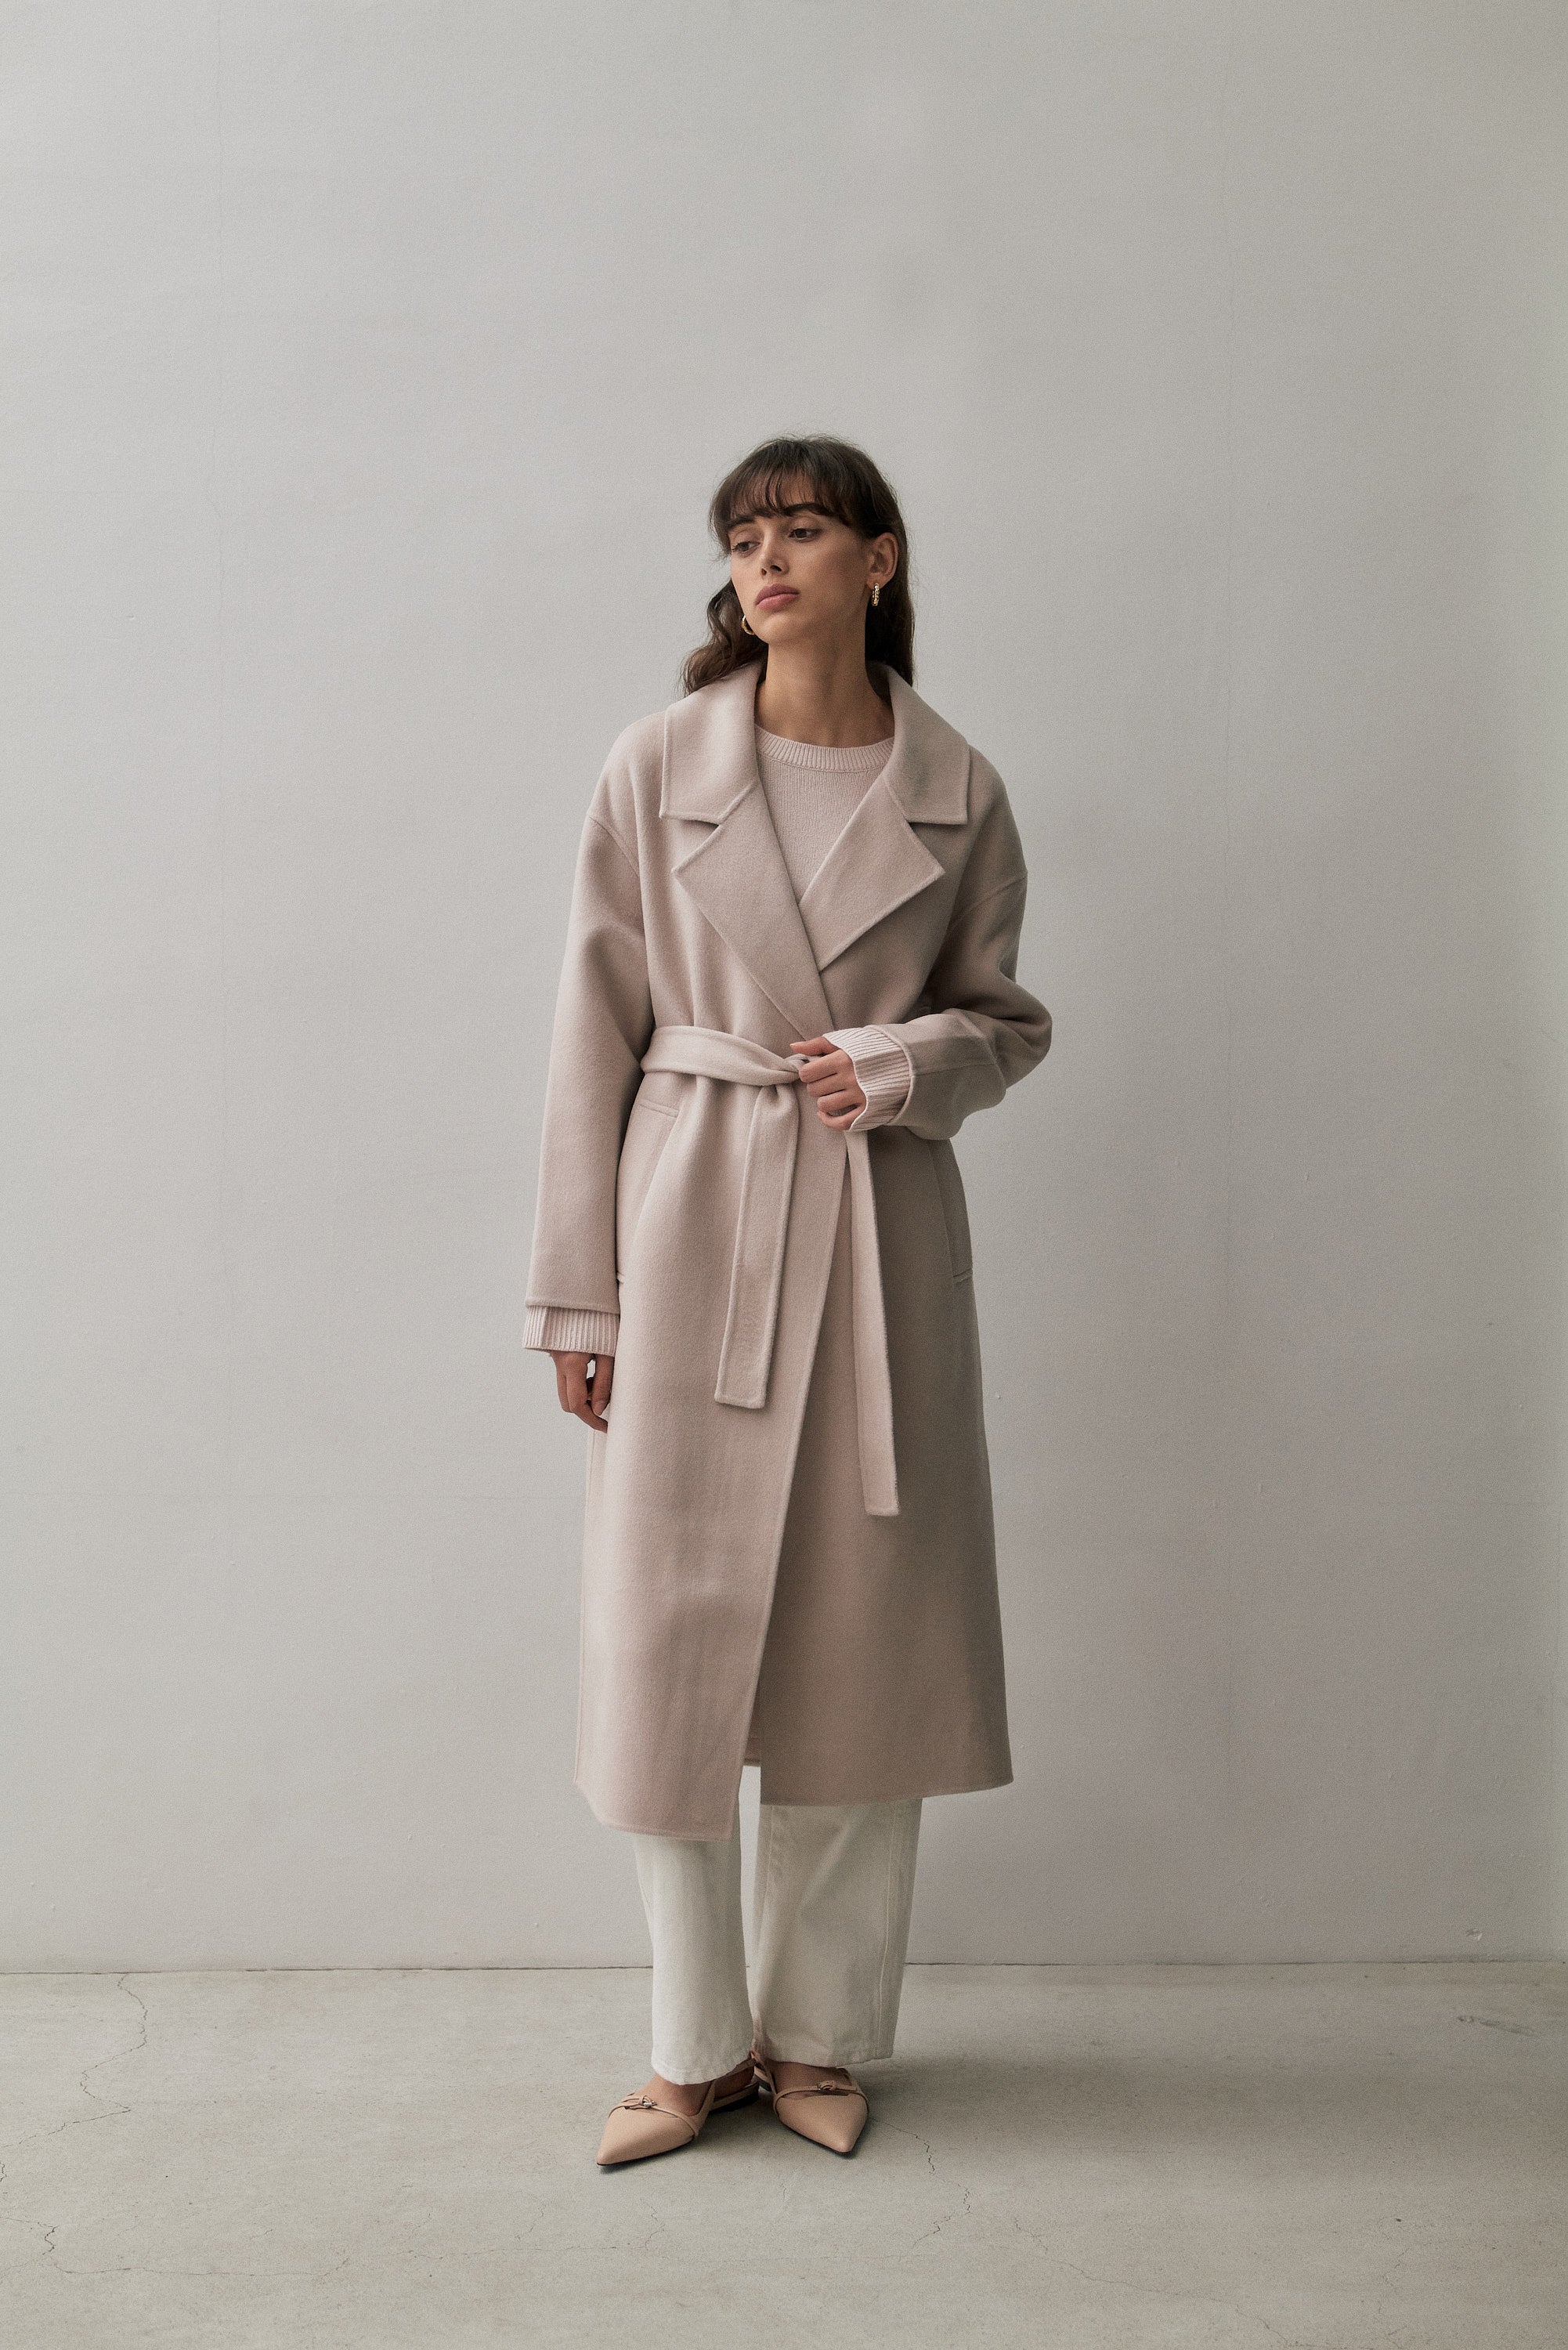 byTiMo  Tailored Coat - Camel